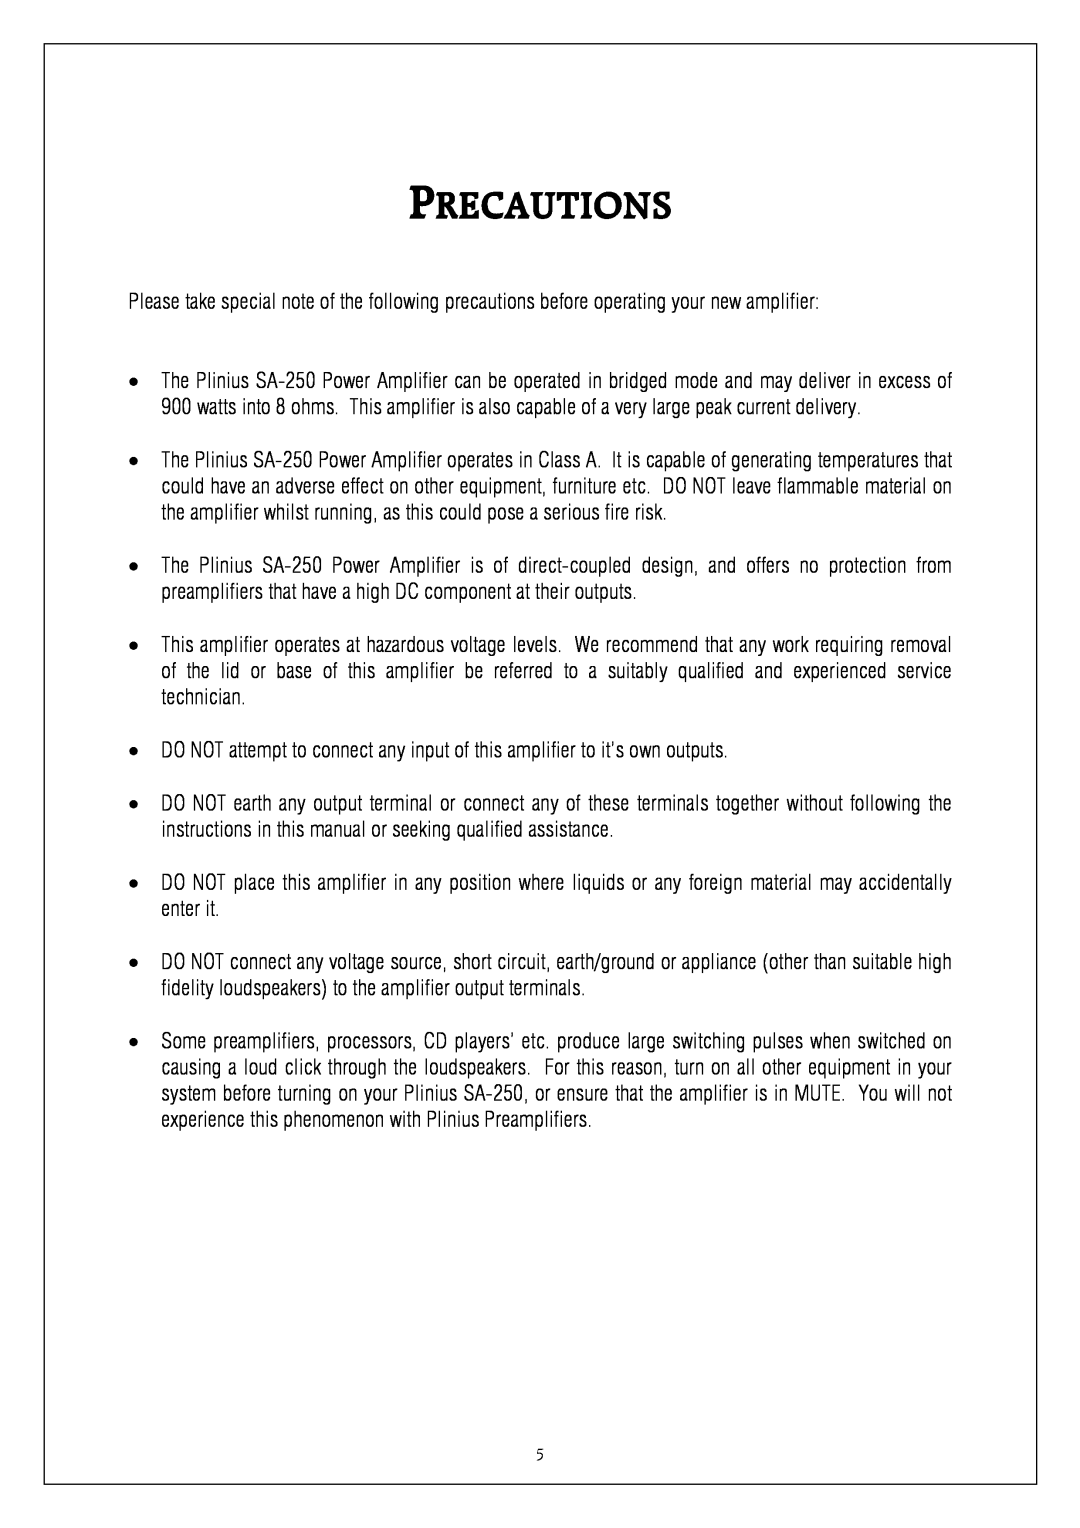 Plinius Audio SA-250 manual Please take special note of the following precautions before operating your new amplifier 